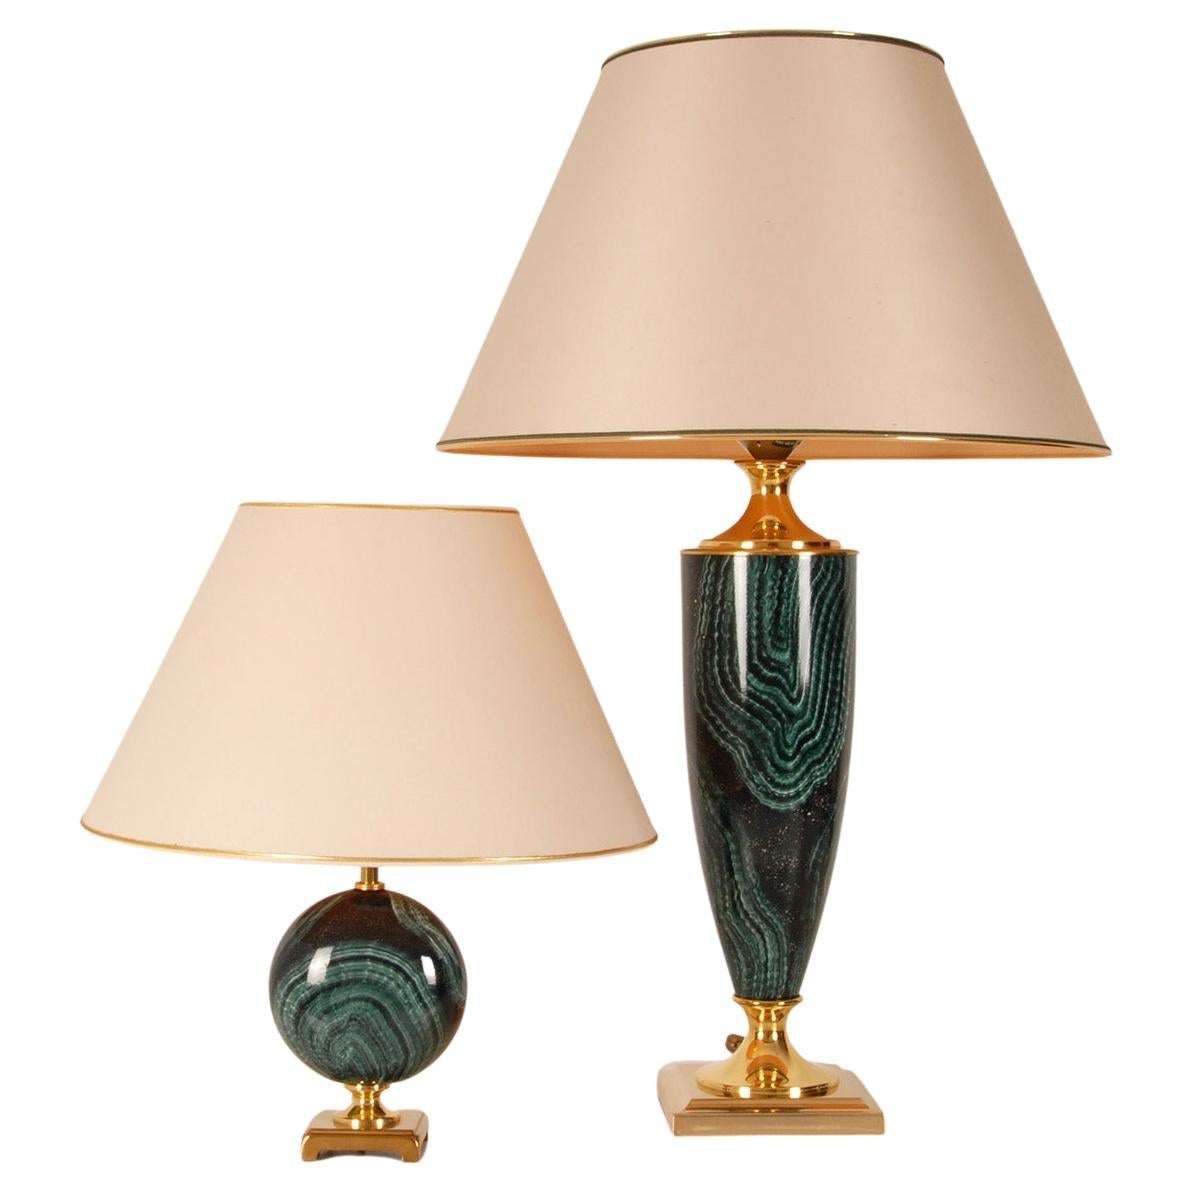 Two faux Malachite & gold gilded table lamps
Made of brass and coated metal
Design: In the manner of Maison Charles, Maison Jansen and Bagues.
Style: Mid Century Modern, Vintage, Retro, Hollywood Regency
Origin France, 70s
Good used condition, light